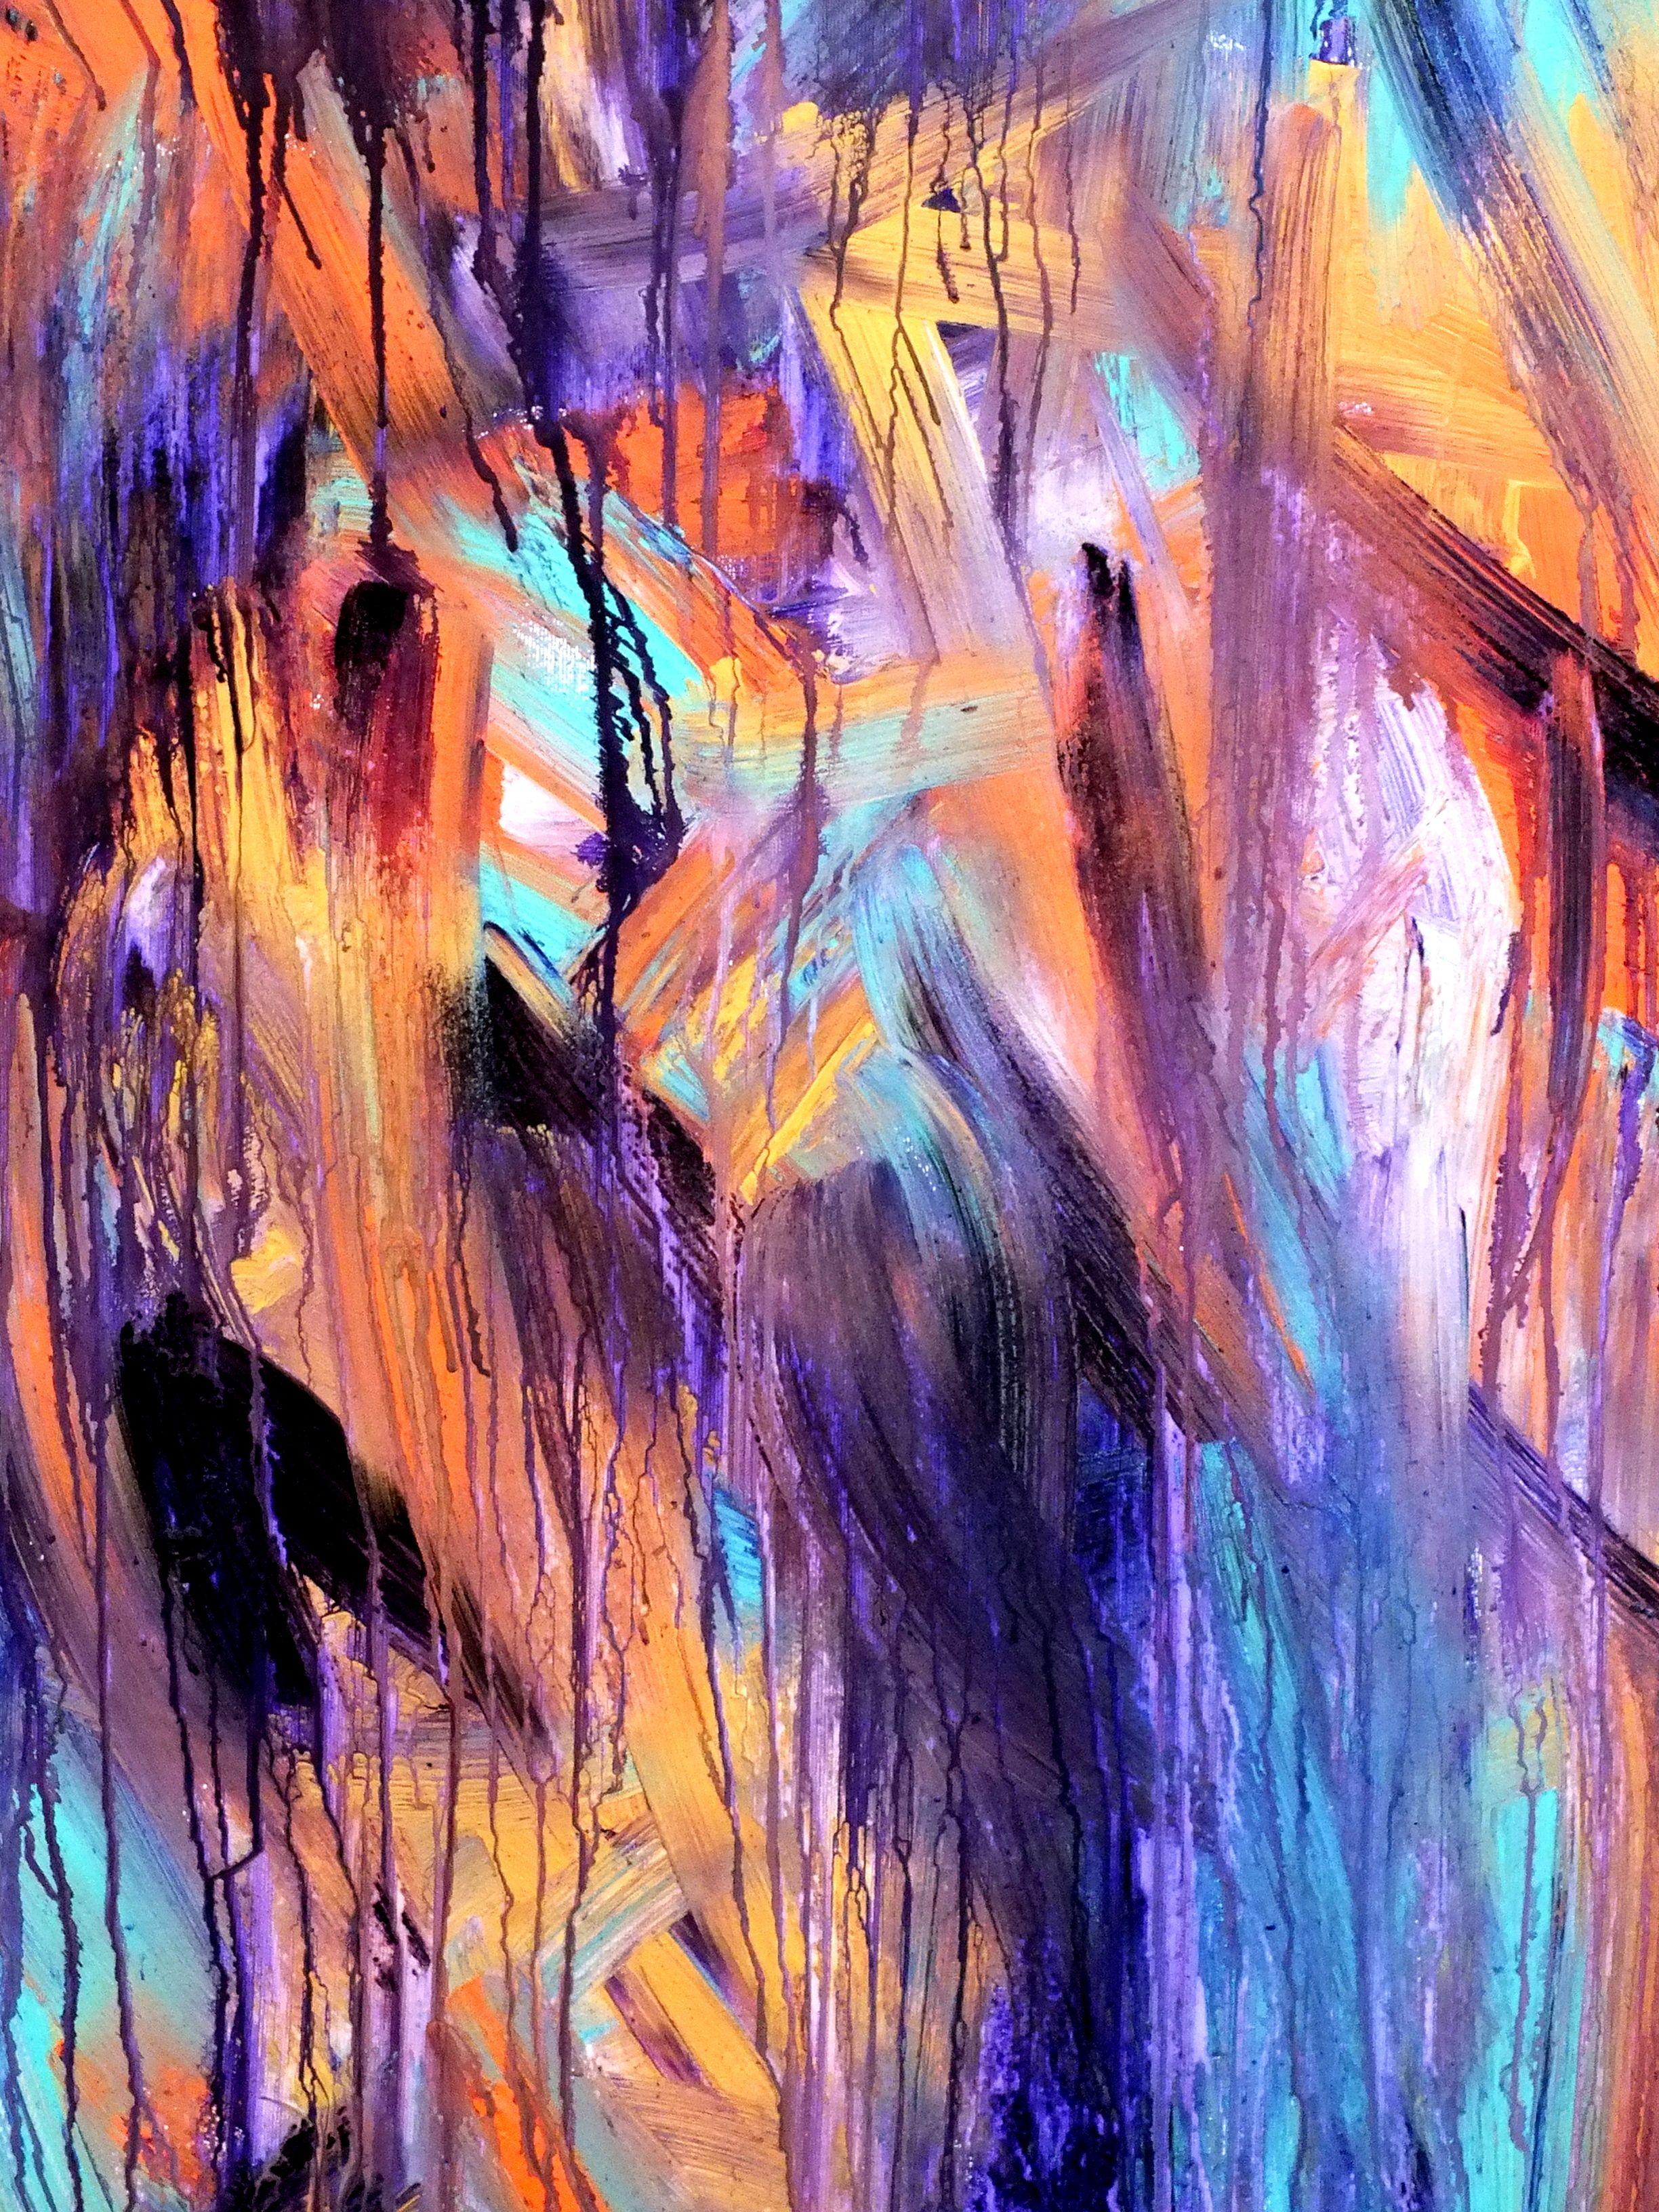 This is a one of a kind painting, an absolutely spontaneous, vibrant and unique creation by me, Carla SÃ¡ Fernandes.    This high quality acrylic painting is done on gallery wrapped canvas, with no need for framing, as the edges are painted. You